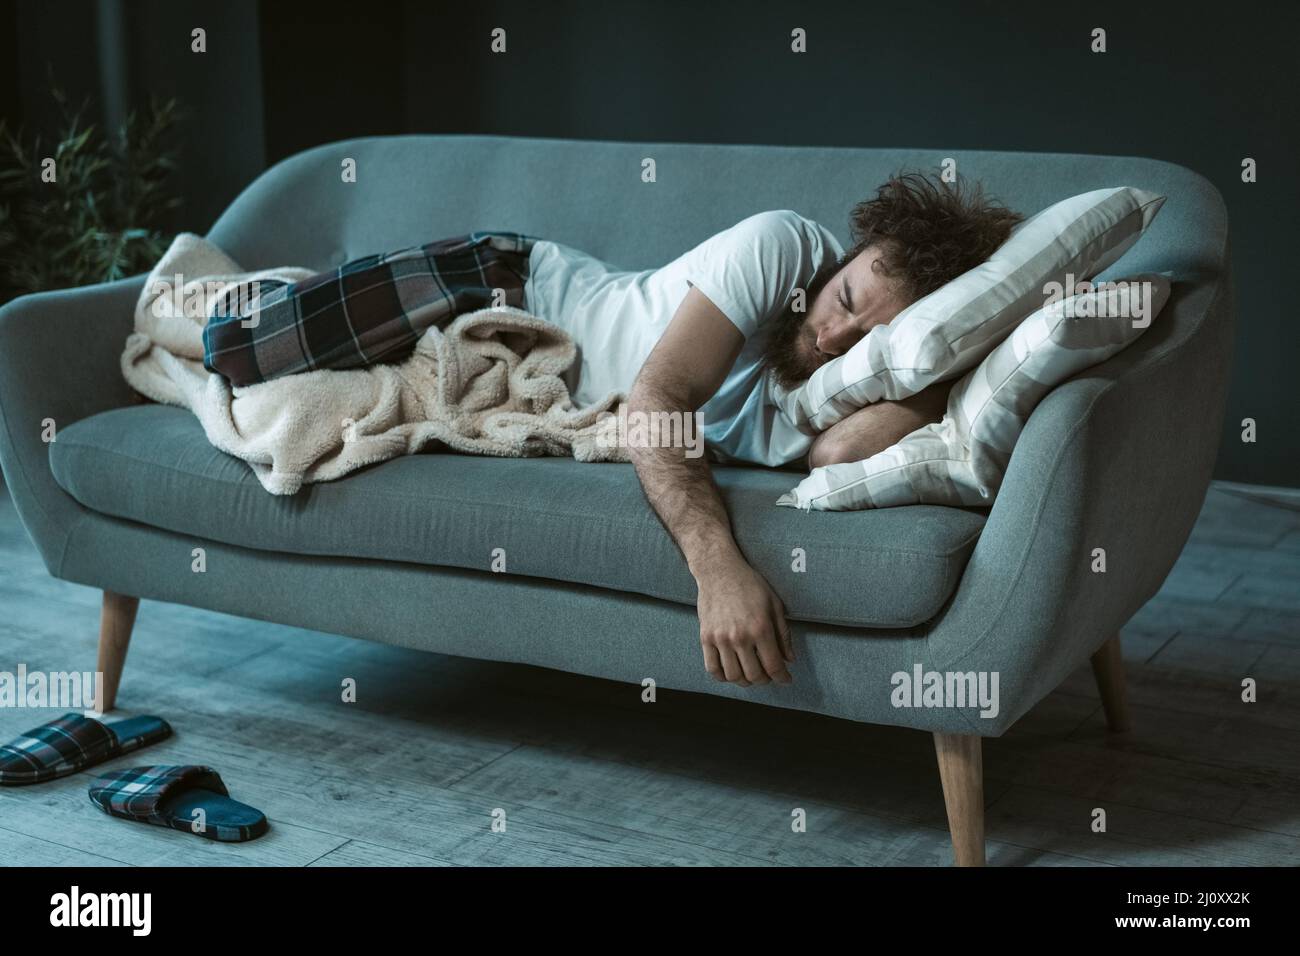 Crashed out sleeping handsome man fell asleep watching tv mid day resting on the couch or sofa enjoying weekend or quarantine da Stock Photo